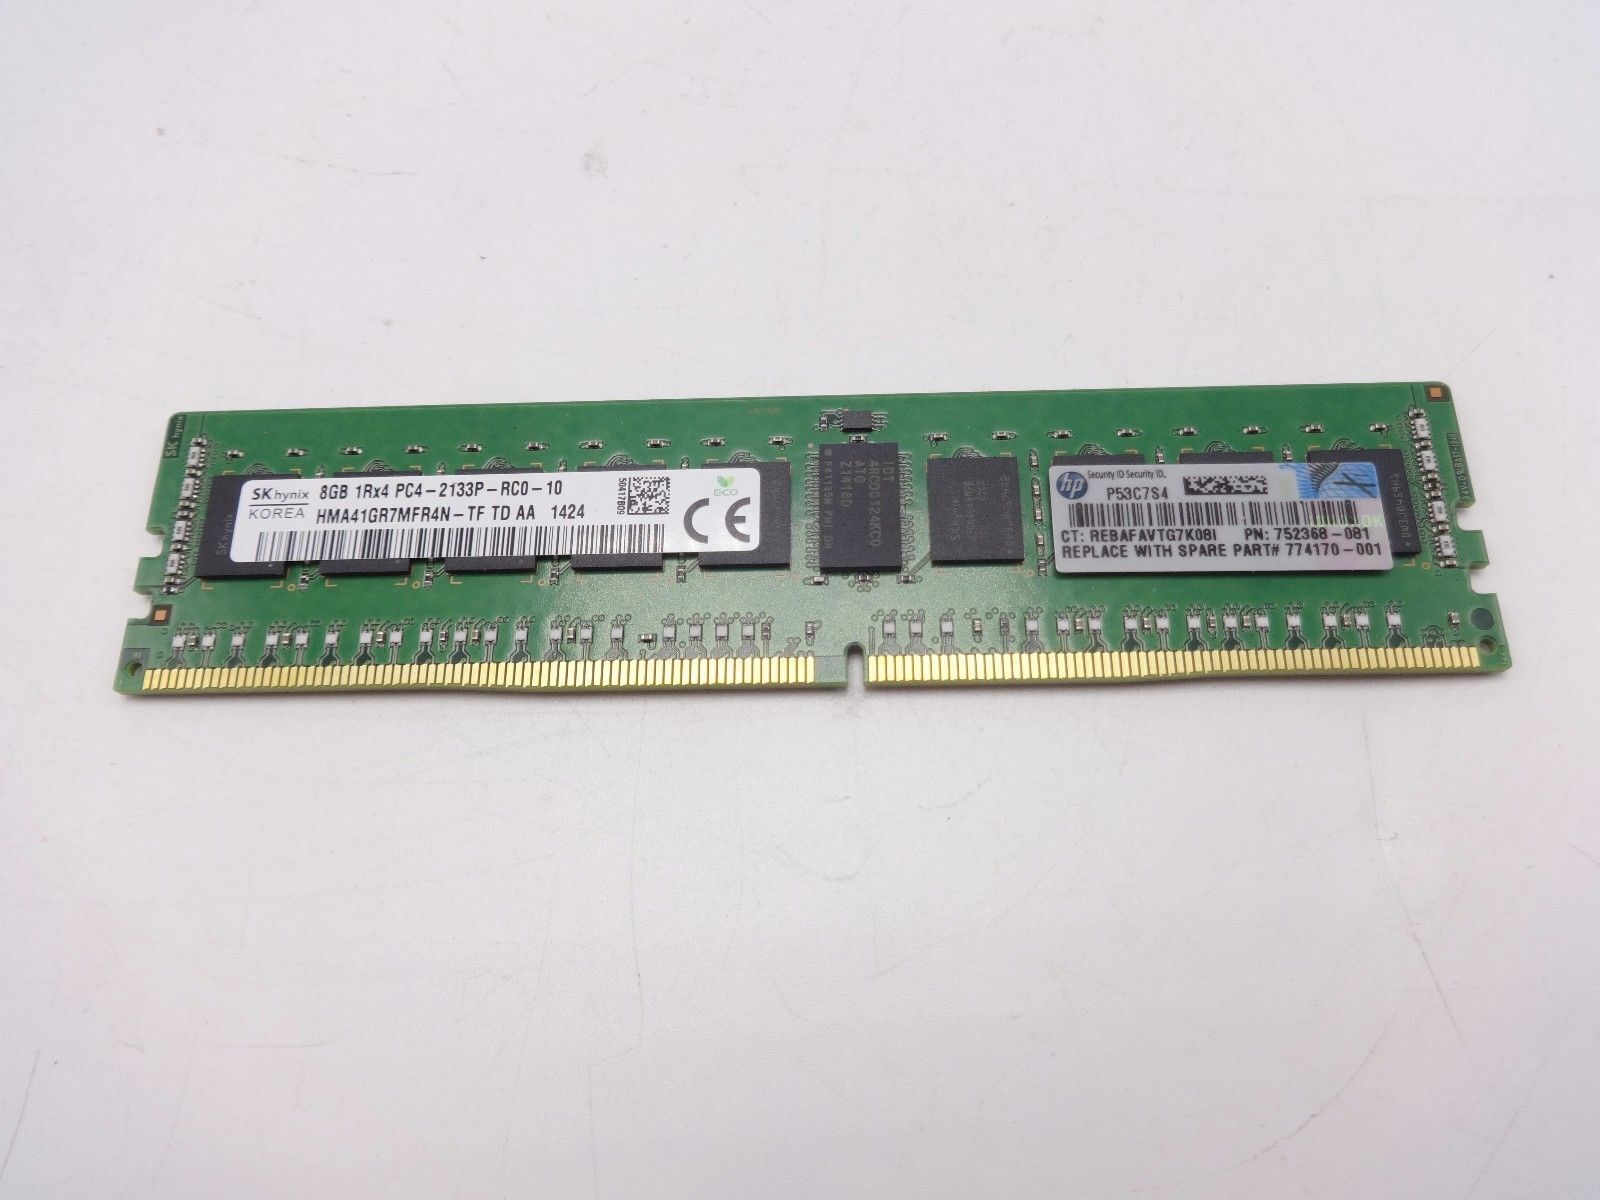 Hpe 726718-B21 8GB 1RX4 PC4-2133P 752368-081 774170-001 **Server Memory only**